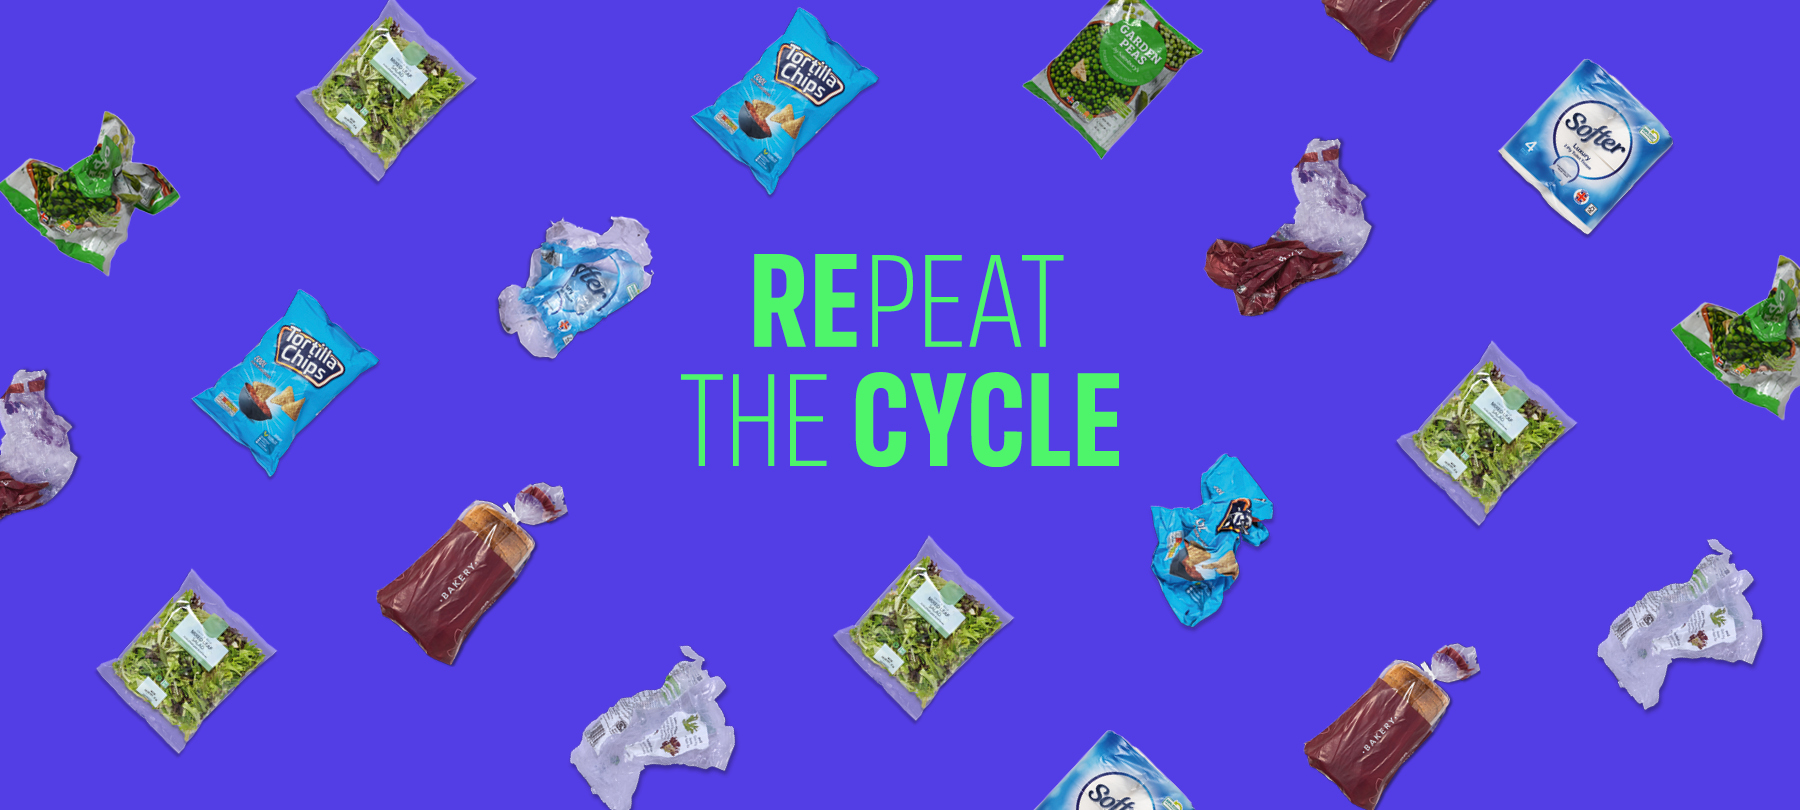 Repeat The Cycle 